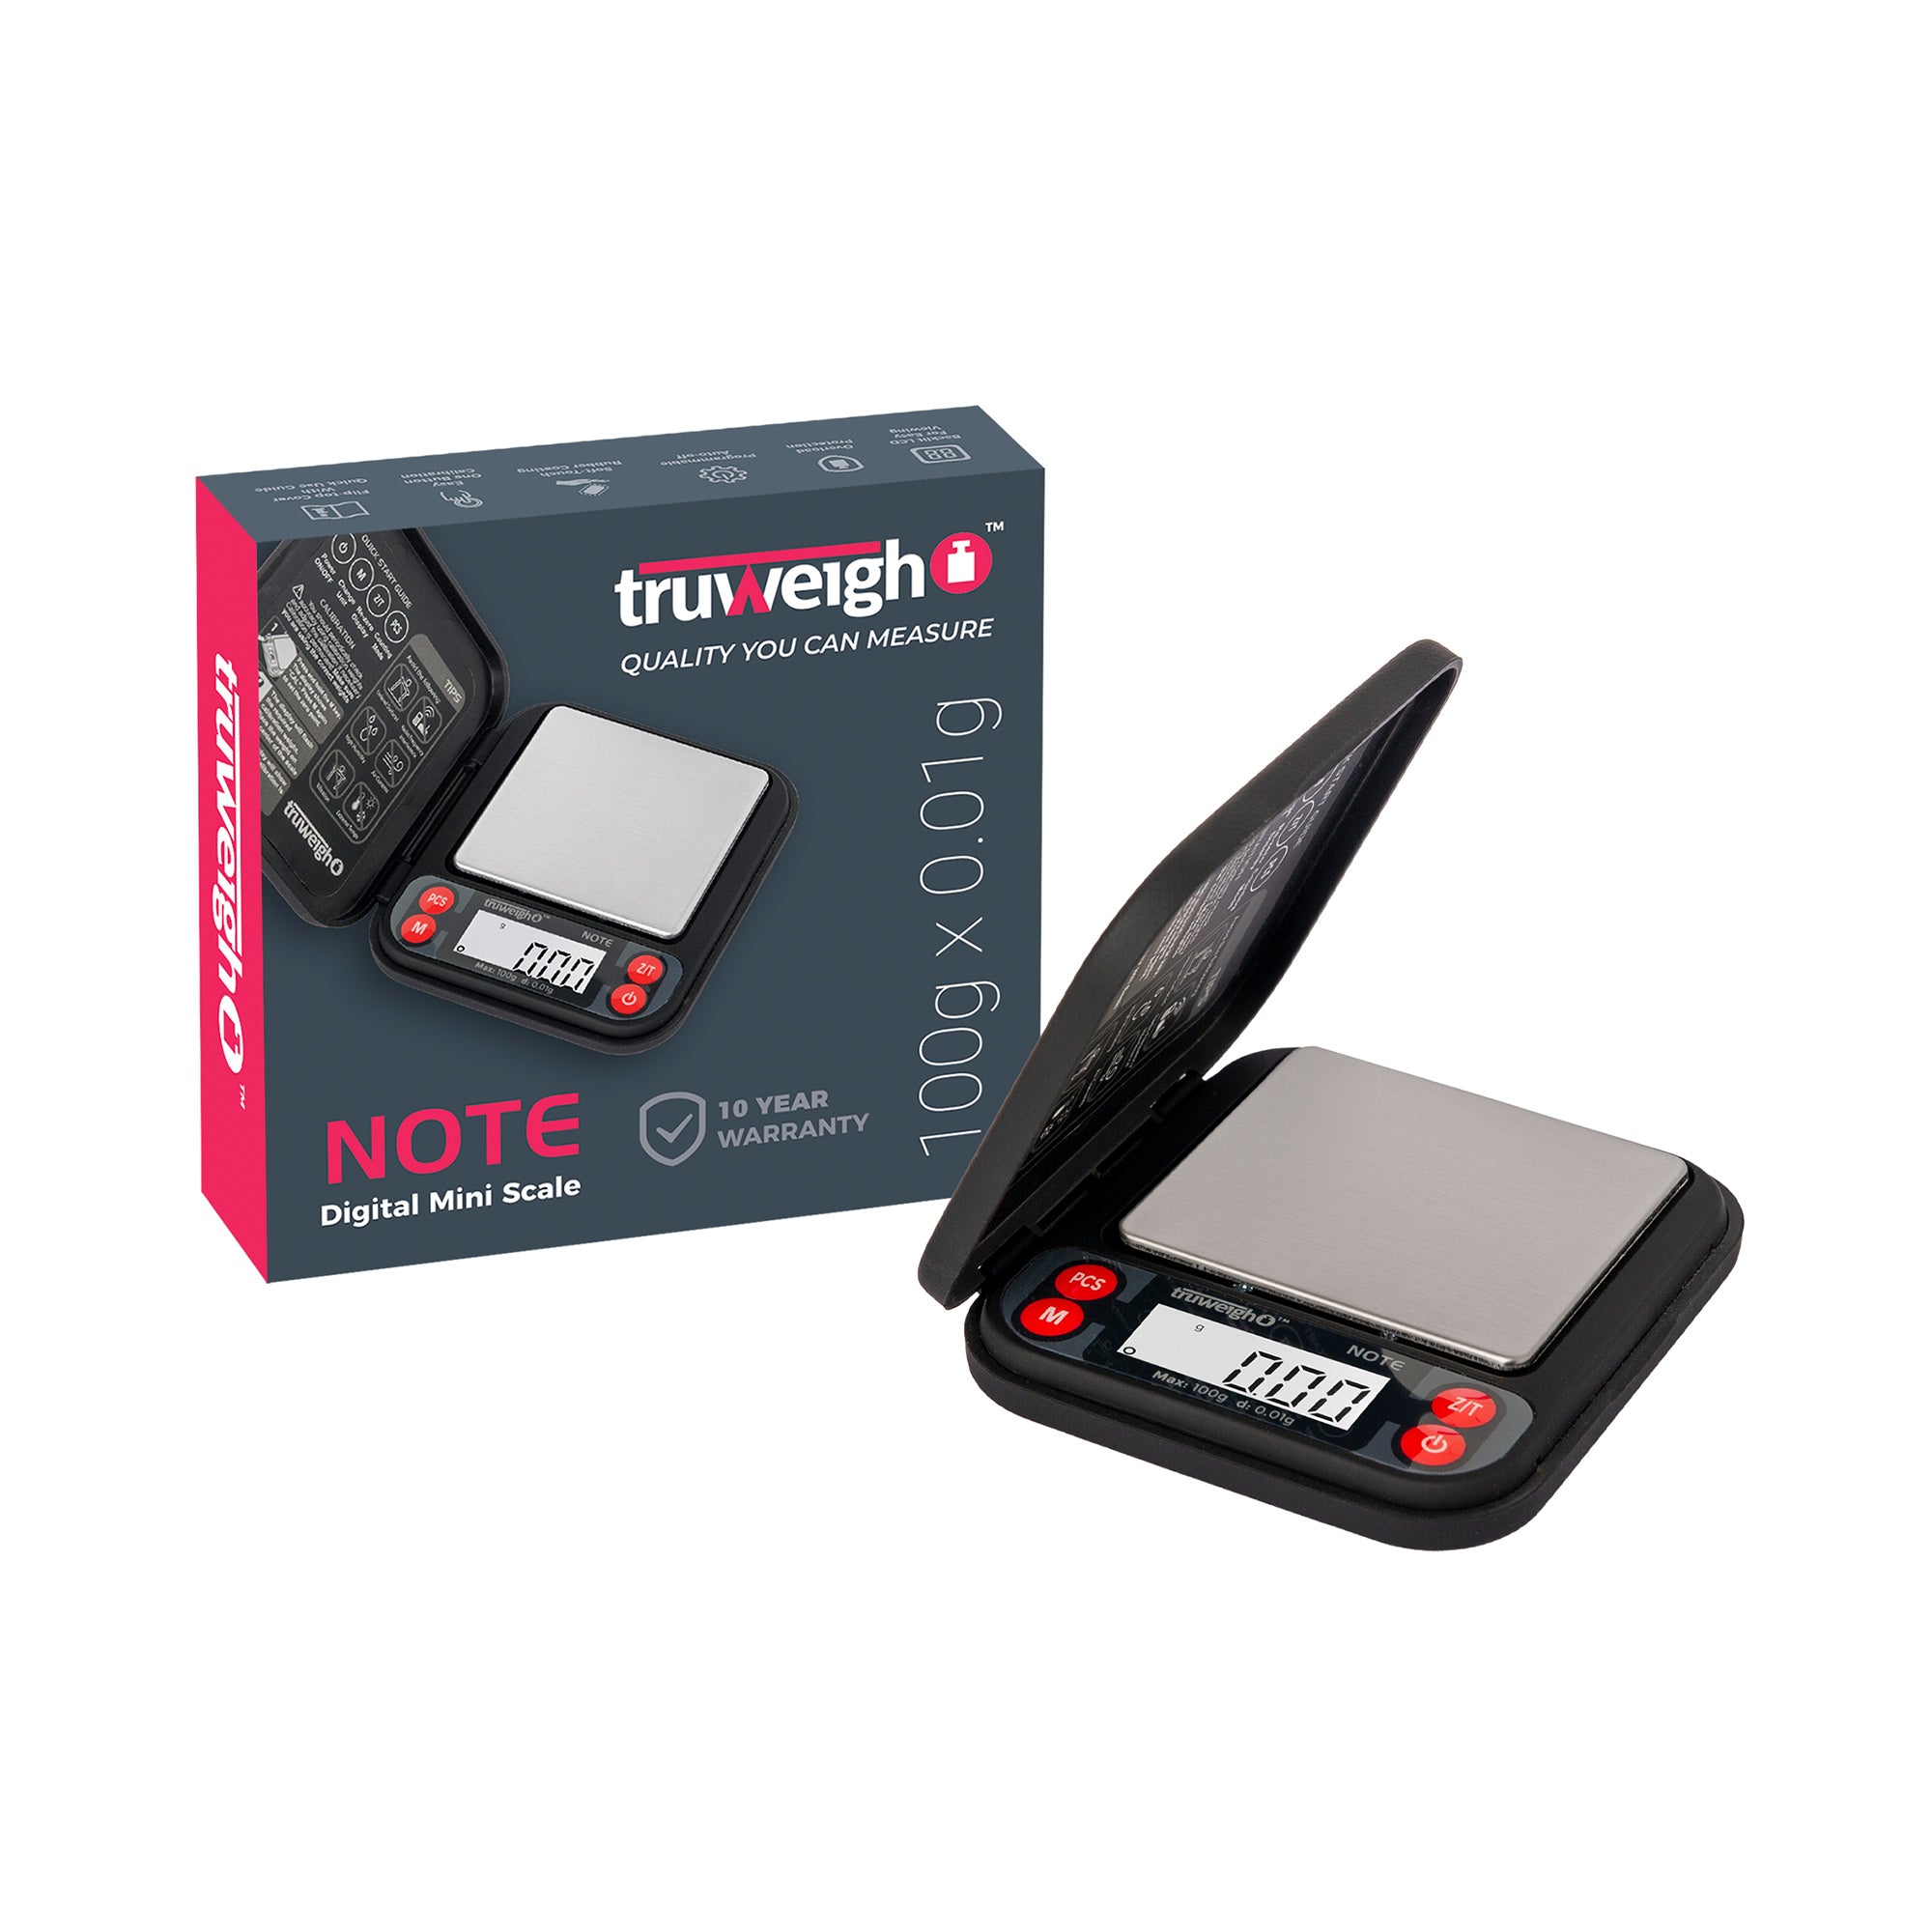 The black Truweigh Note pocket scale is shown open, turned on, and sitting next to the box